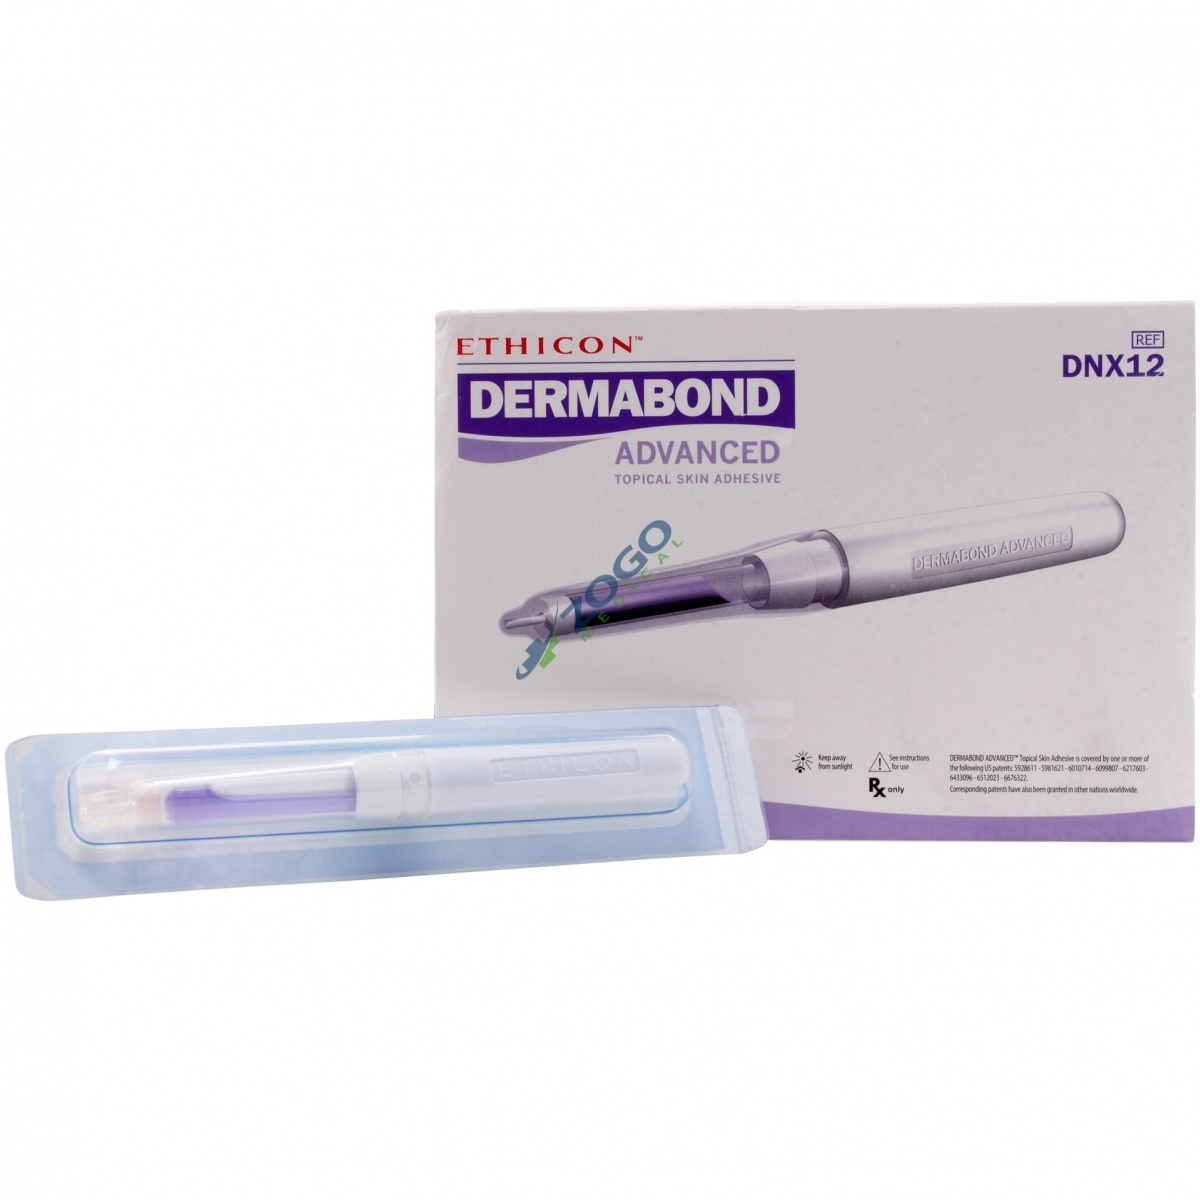 Dermabond Advanced Topical Skin Adhesive .7ml Appicator - Expired